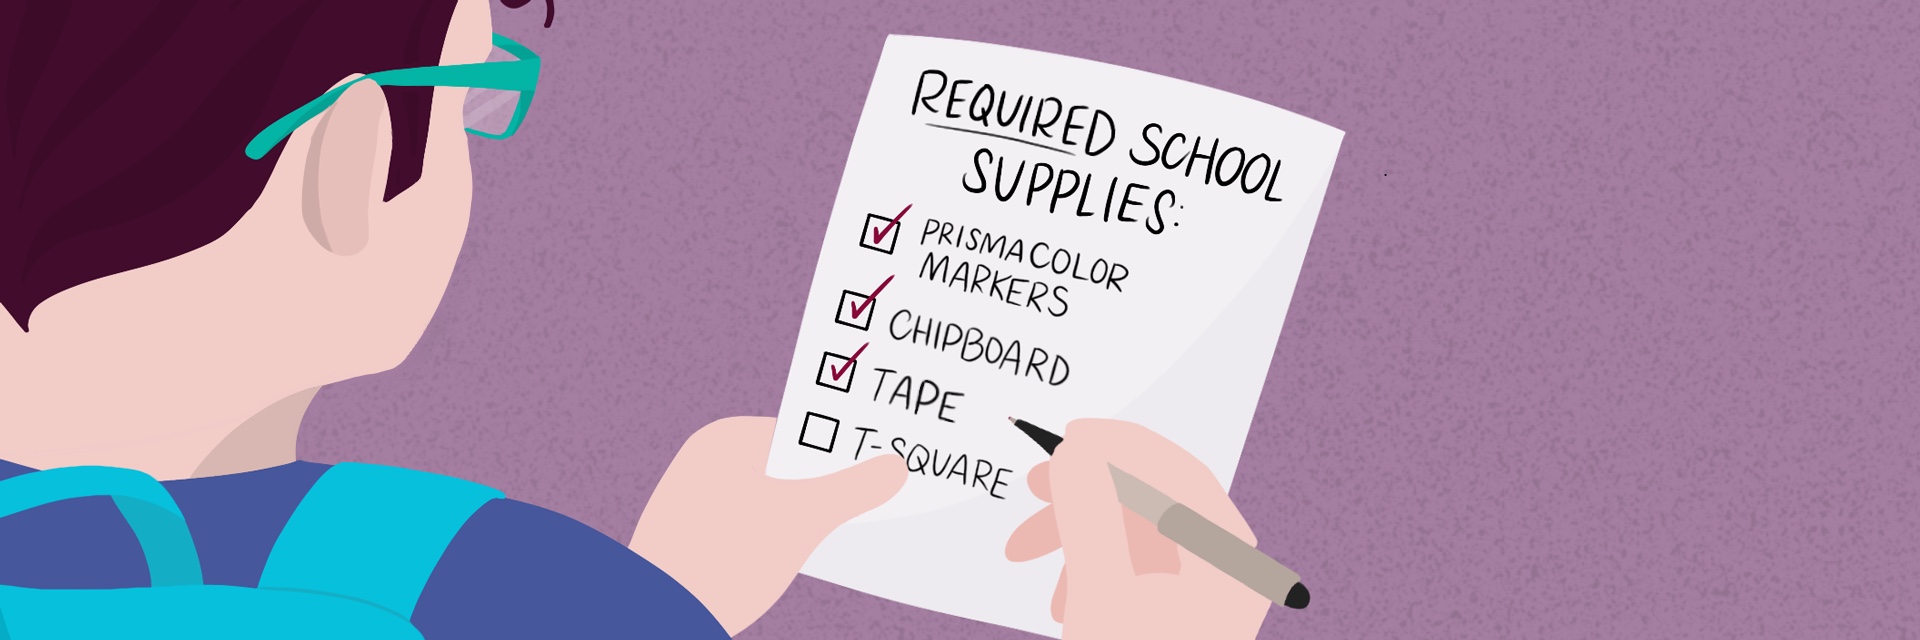 Illustration of student and looking at a list of required school supplies